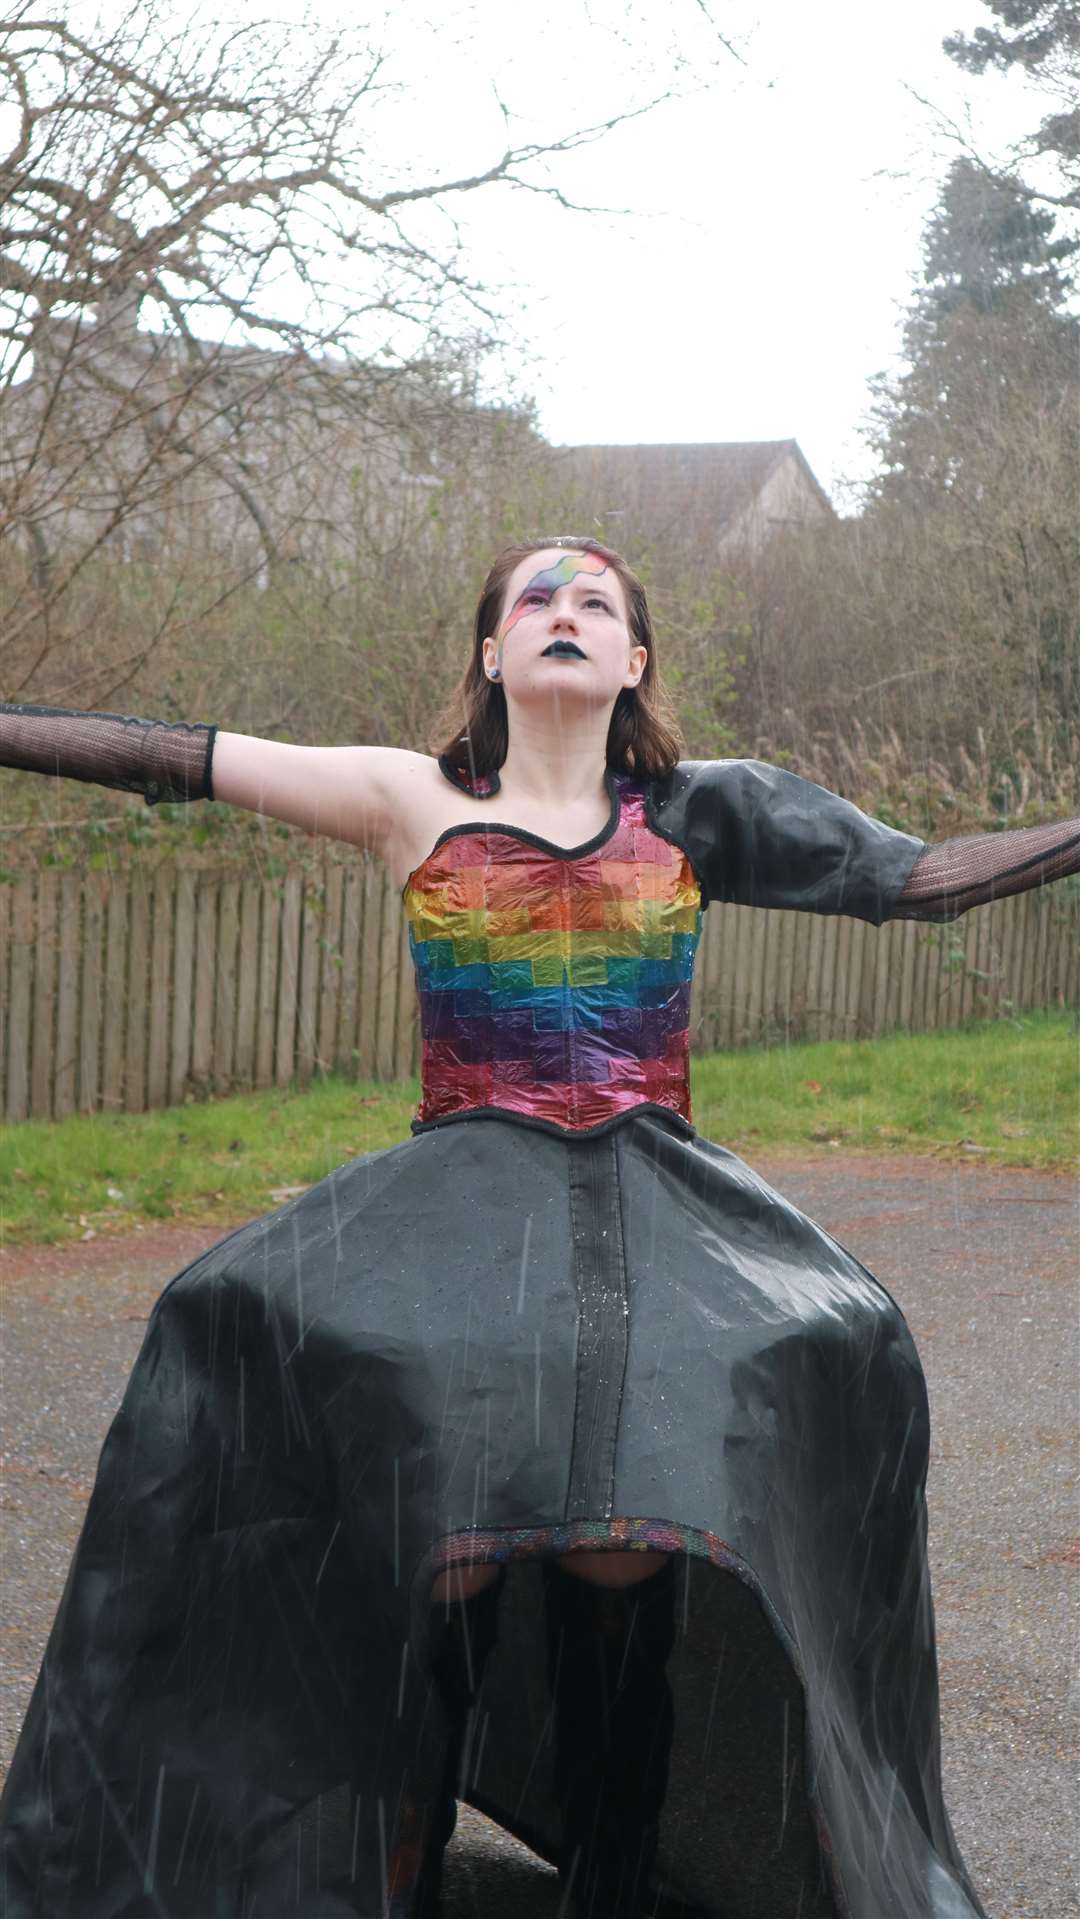 The ball gown has been made from recycled materials including a trampoline, chocolate wrappers and an old bike wheel.